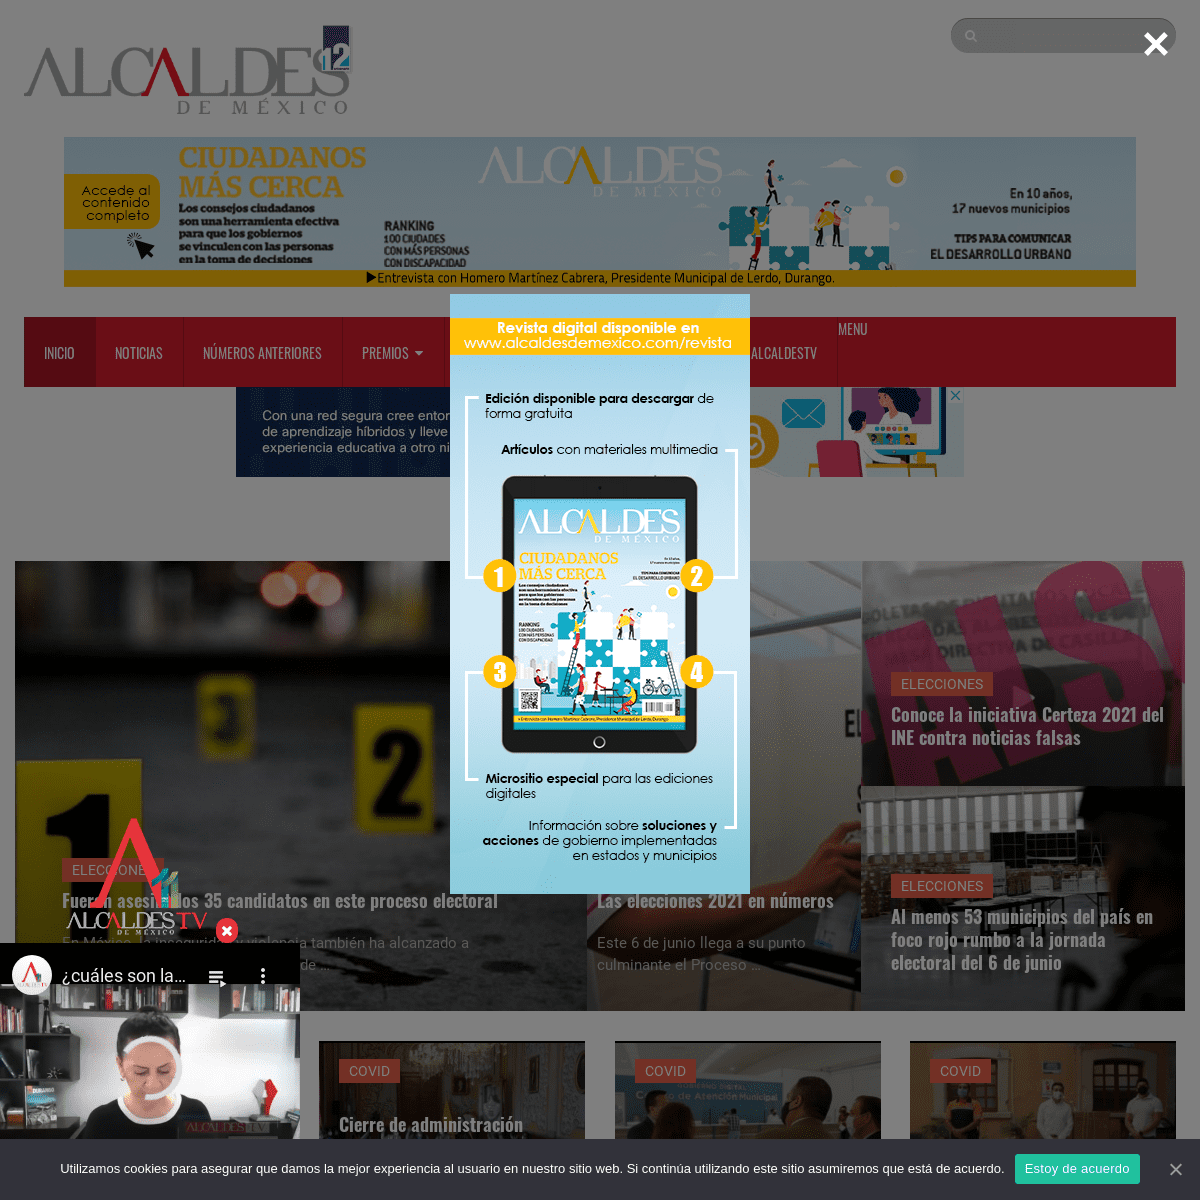 A complete backup of https://alcaldesdemexico.com